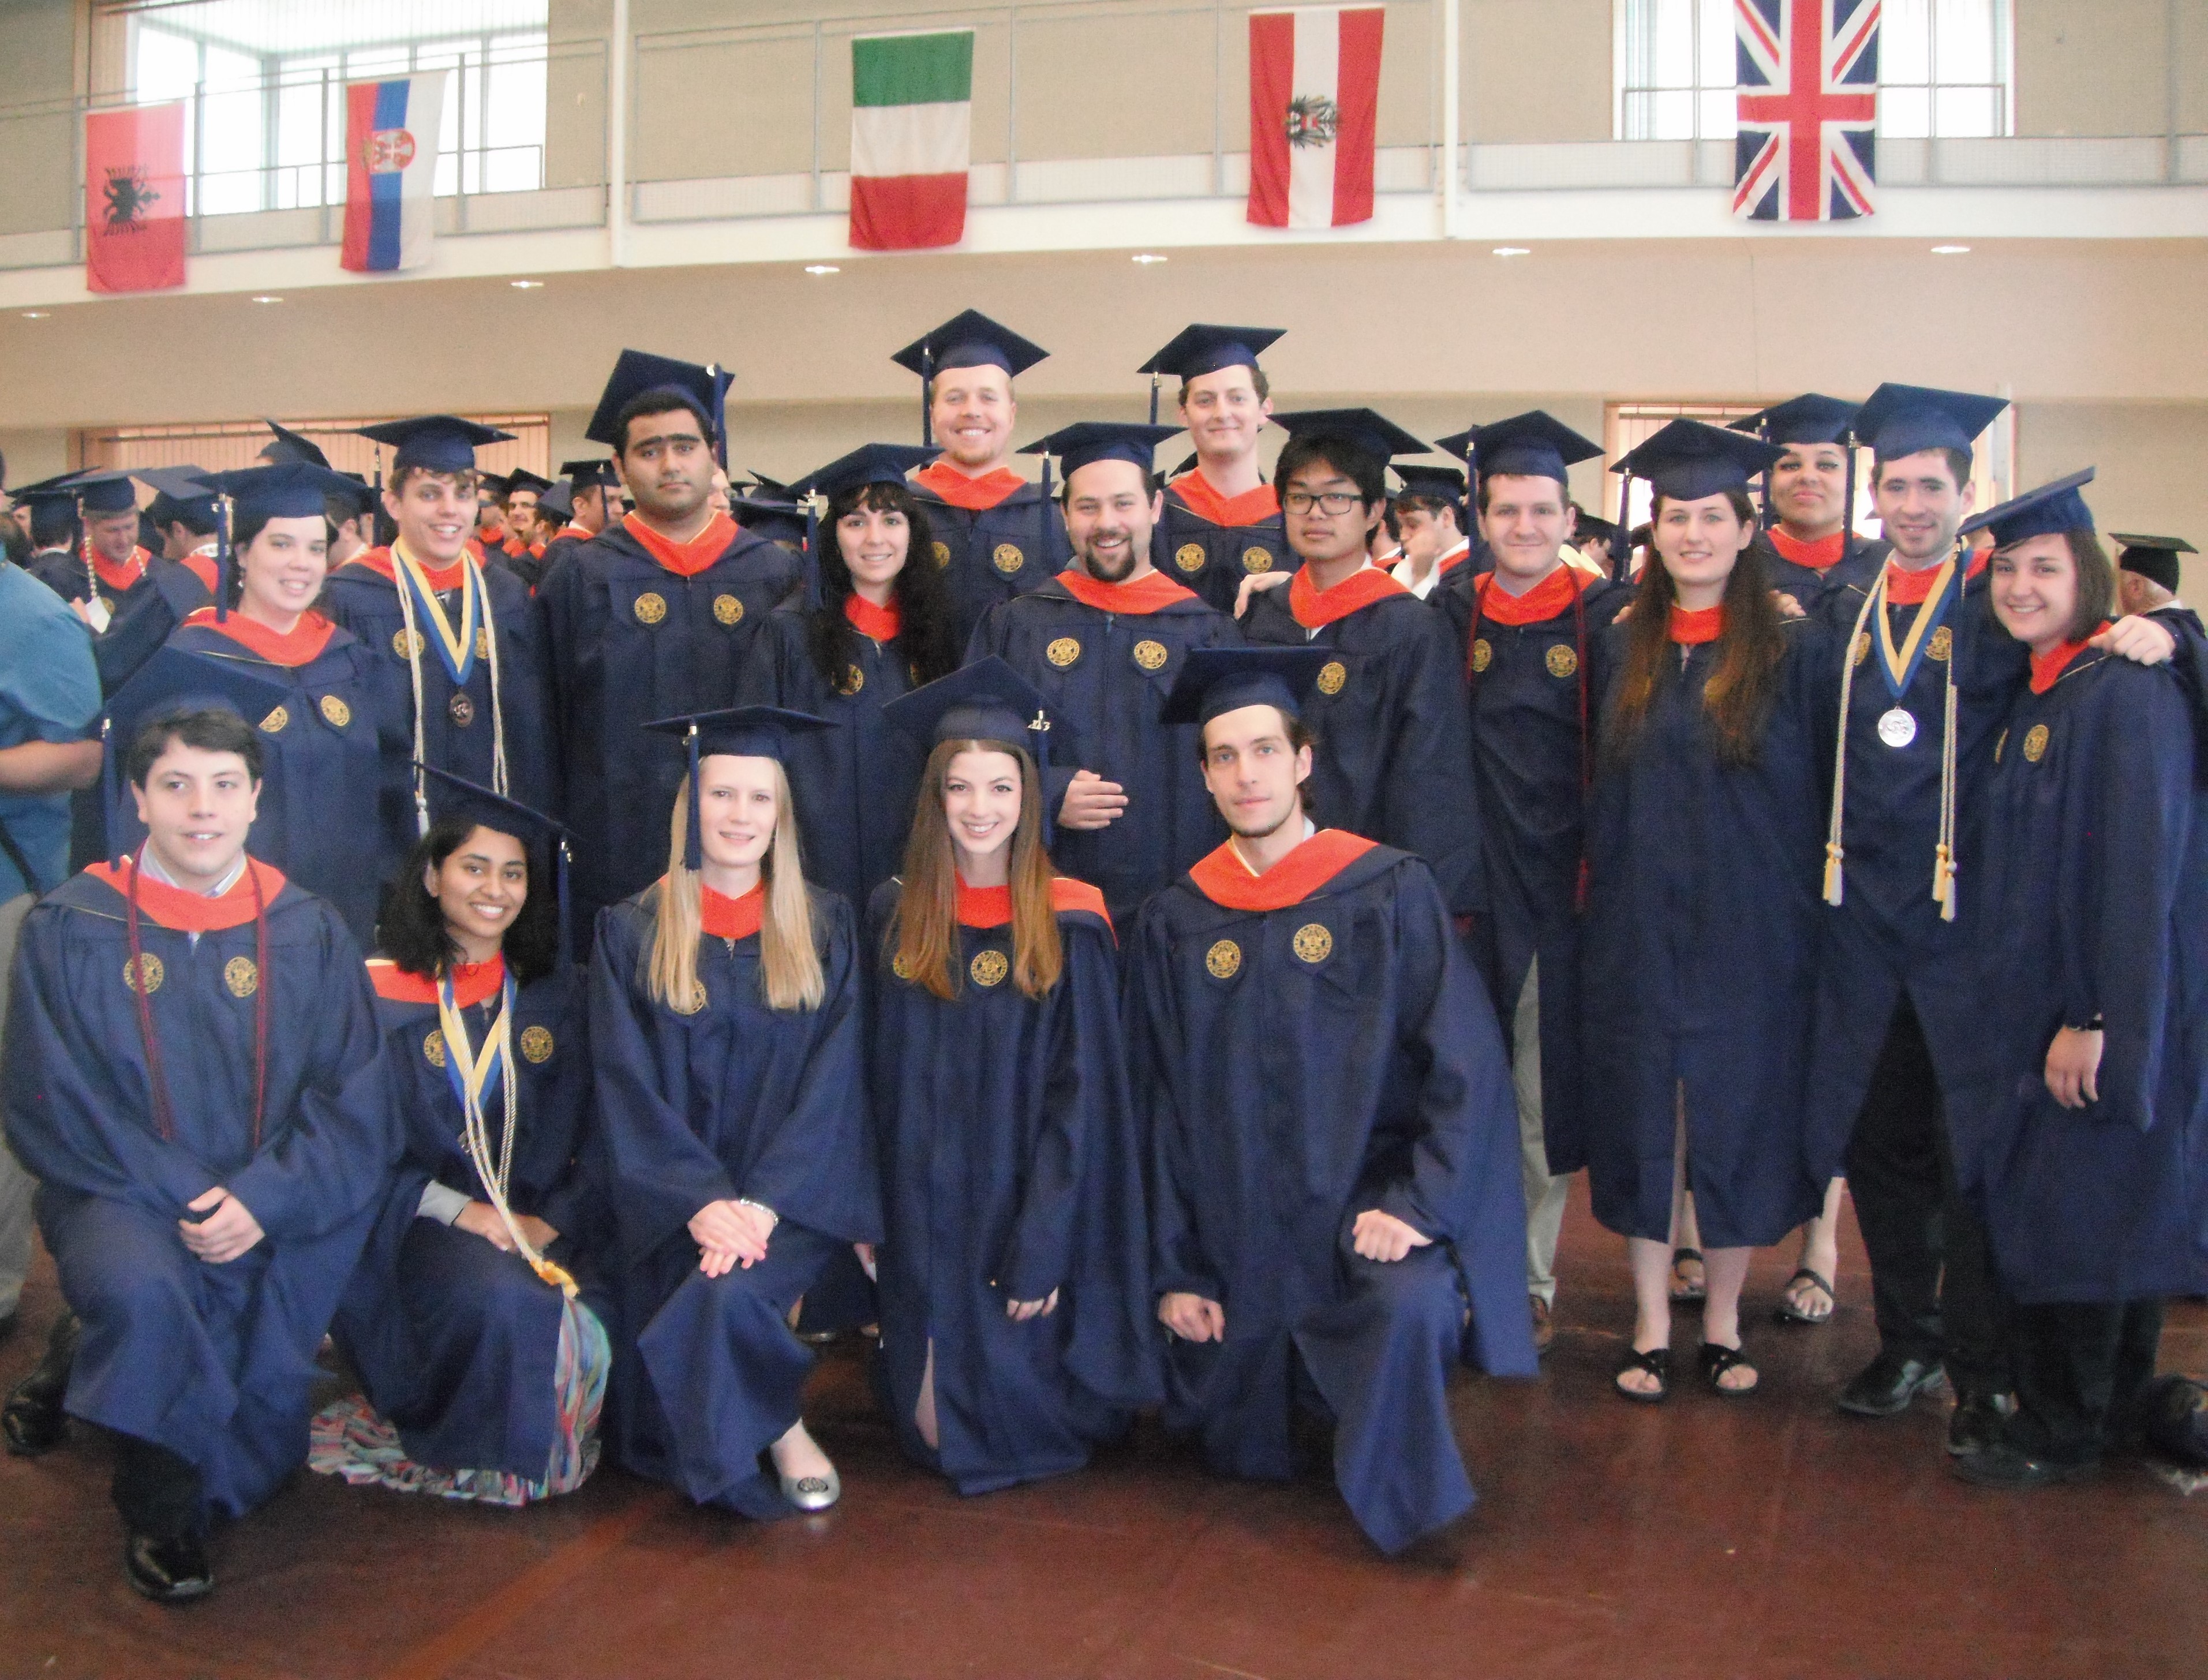 Congratulations to the Drexel Materials Class of 2013!